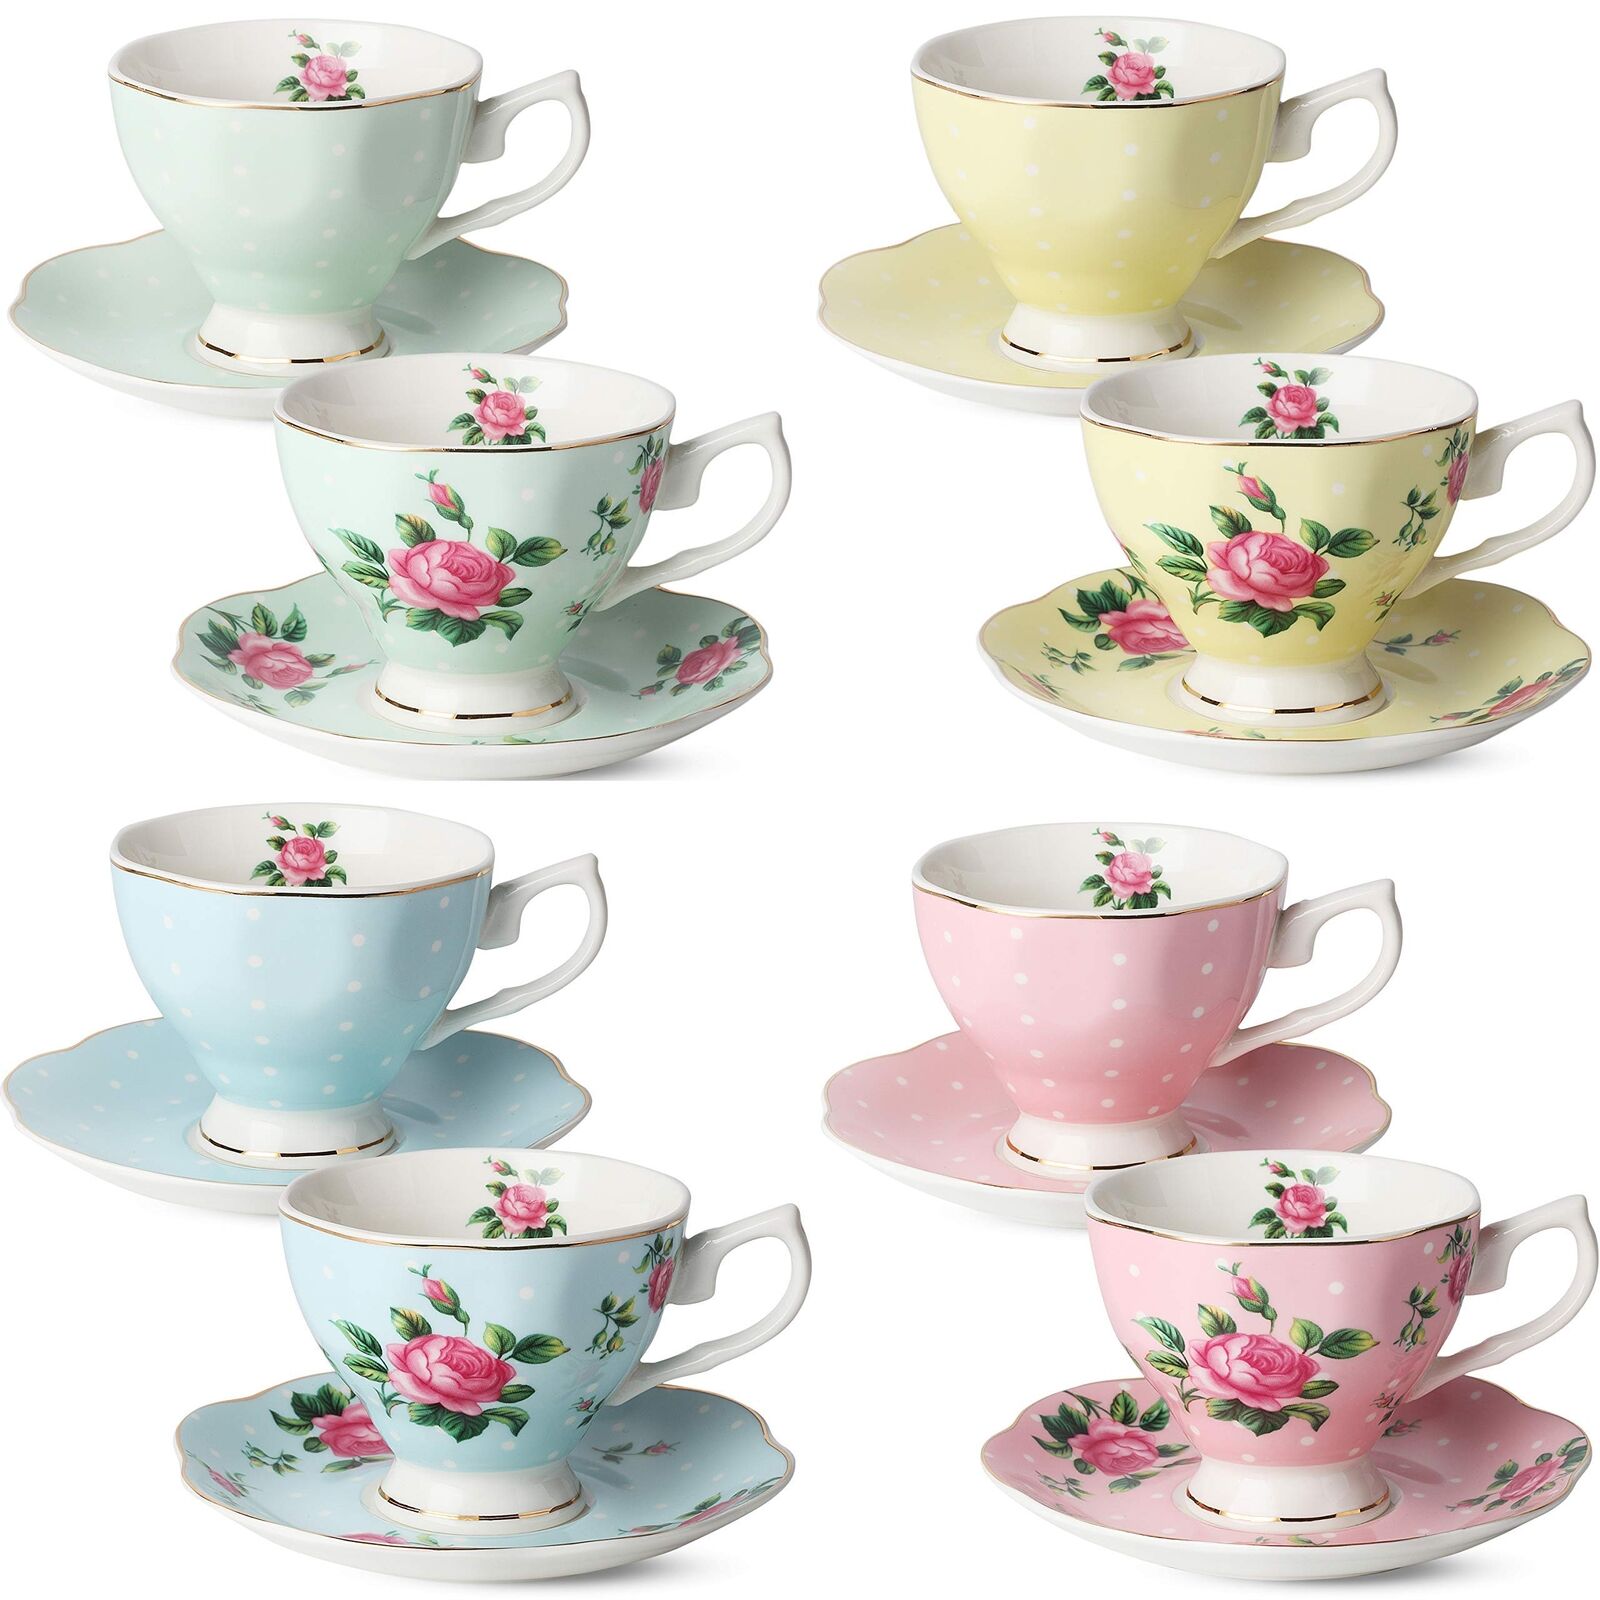 BTaT- Floral Tea Cups and Saucers, Set of 8 (8 oz), Gold Trim and Gift Box, C...